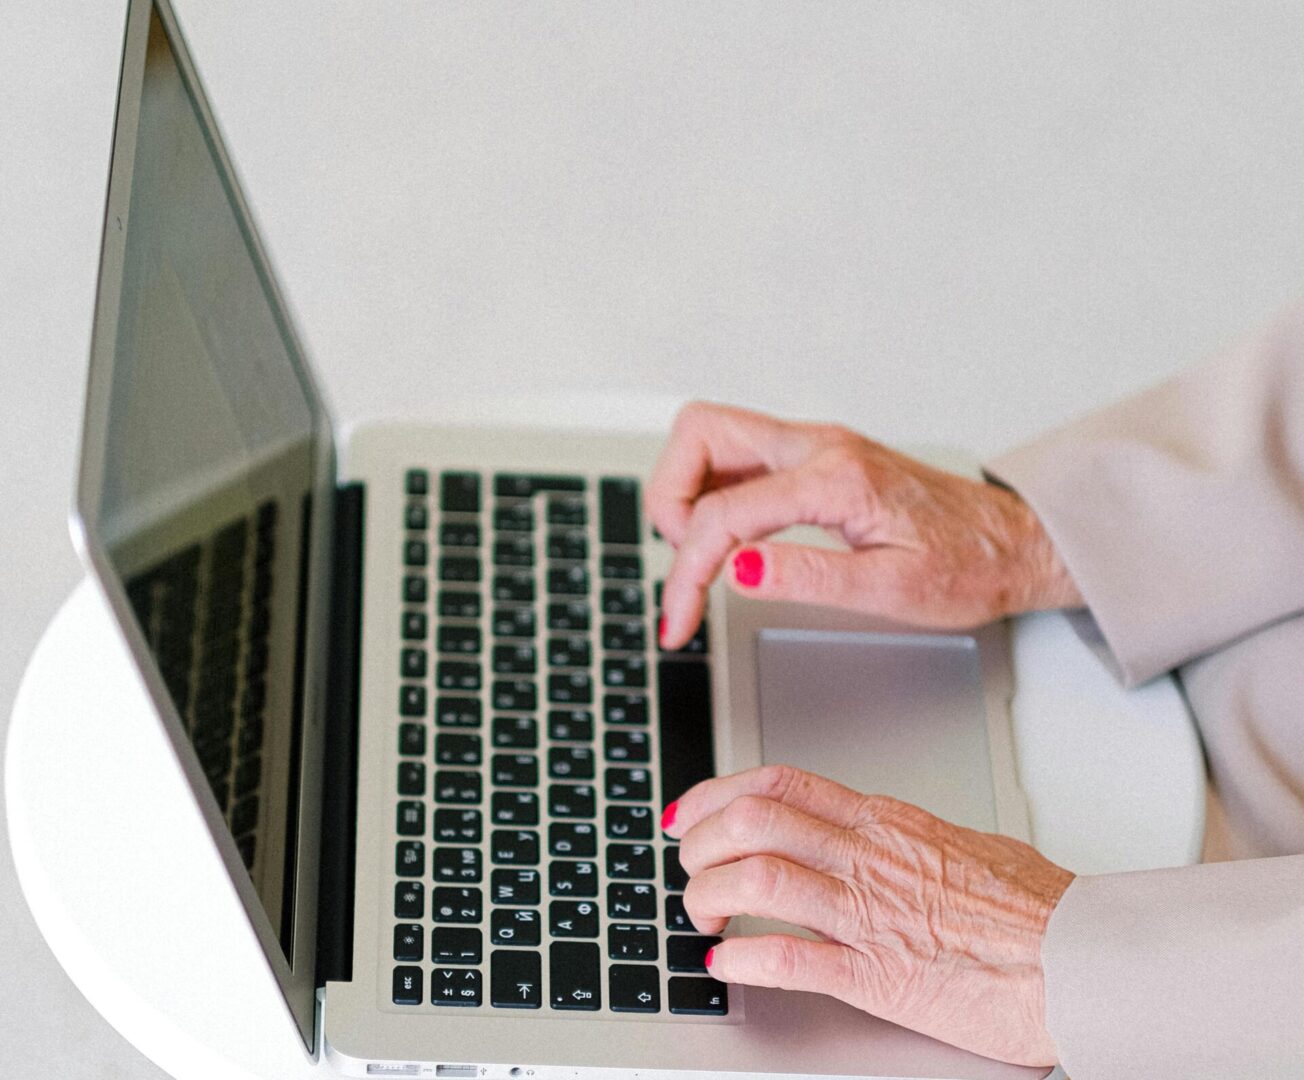 Empowering Older Adults: A Free Technology Class on Prescription Drug Resources in Howard